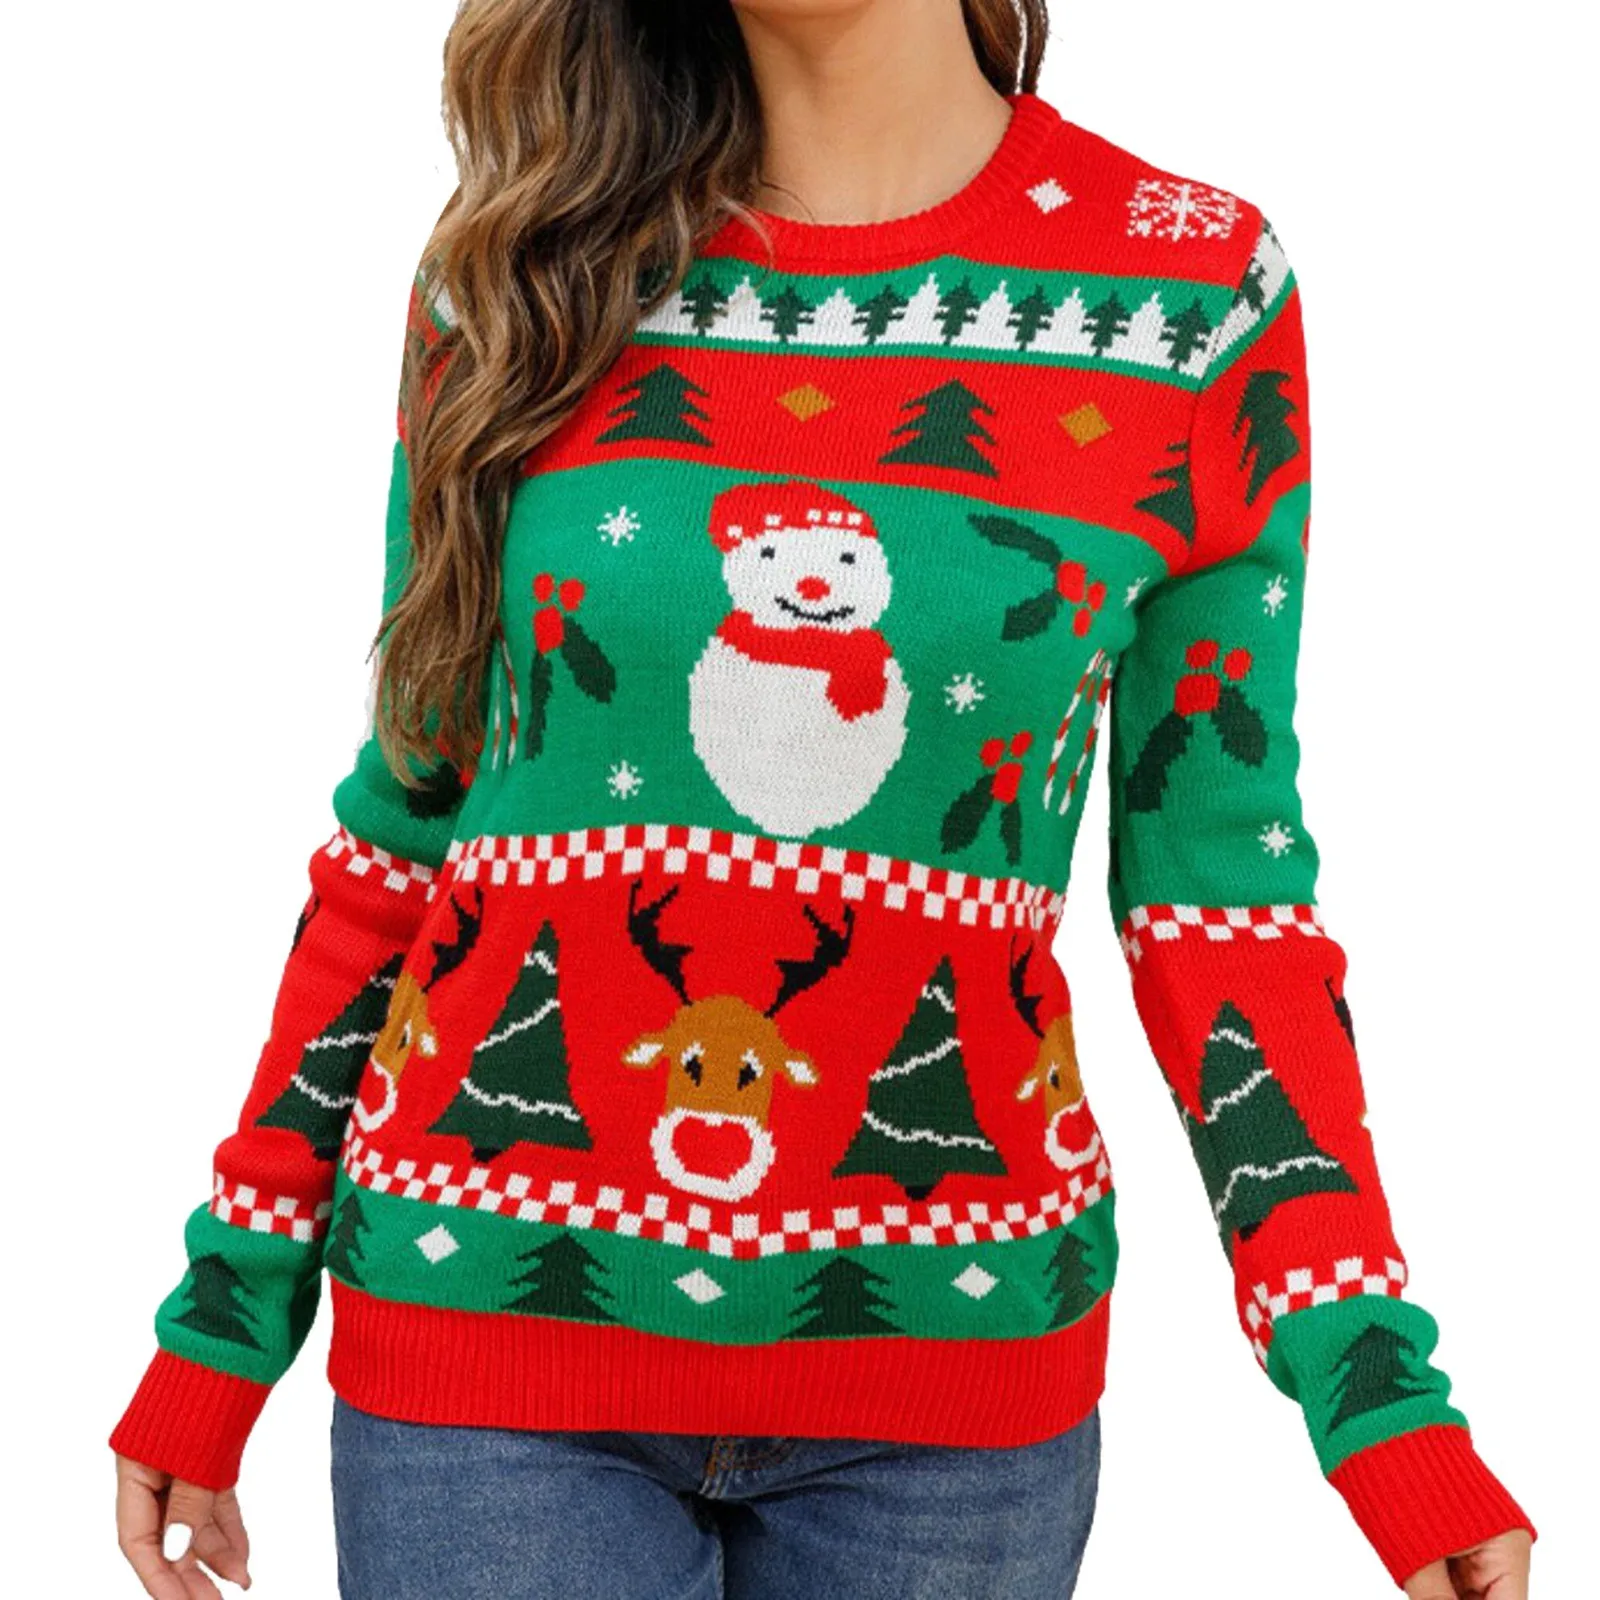 

Women's Fashion Christmas Sweater Contrast Snowman And Deer Cartoon Jacquard Long Sleeve Round Neck Pullover Warm Sweater Women